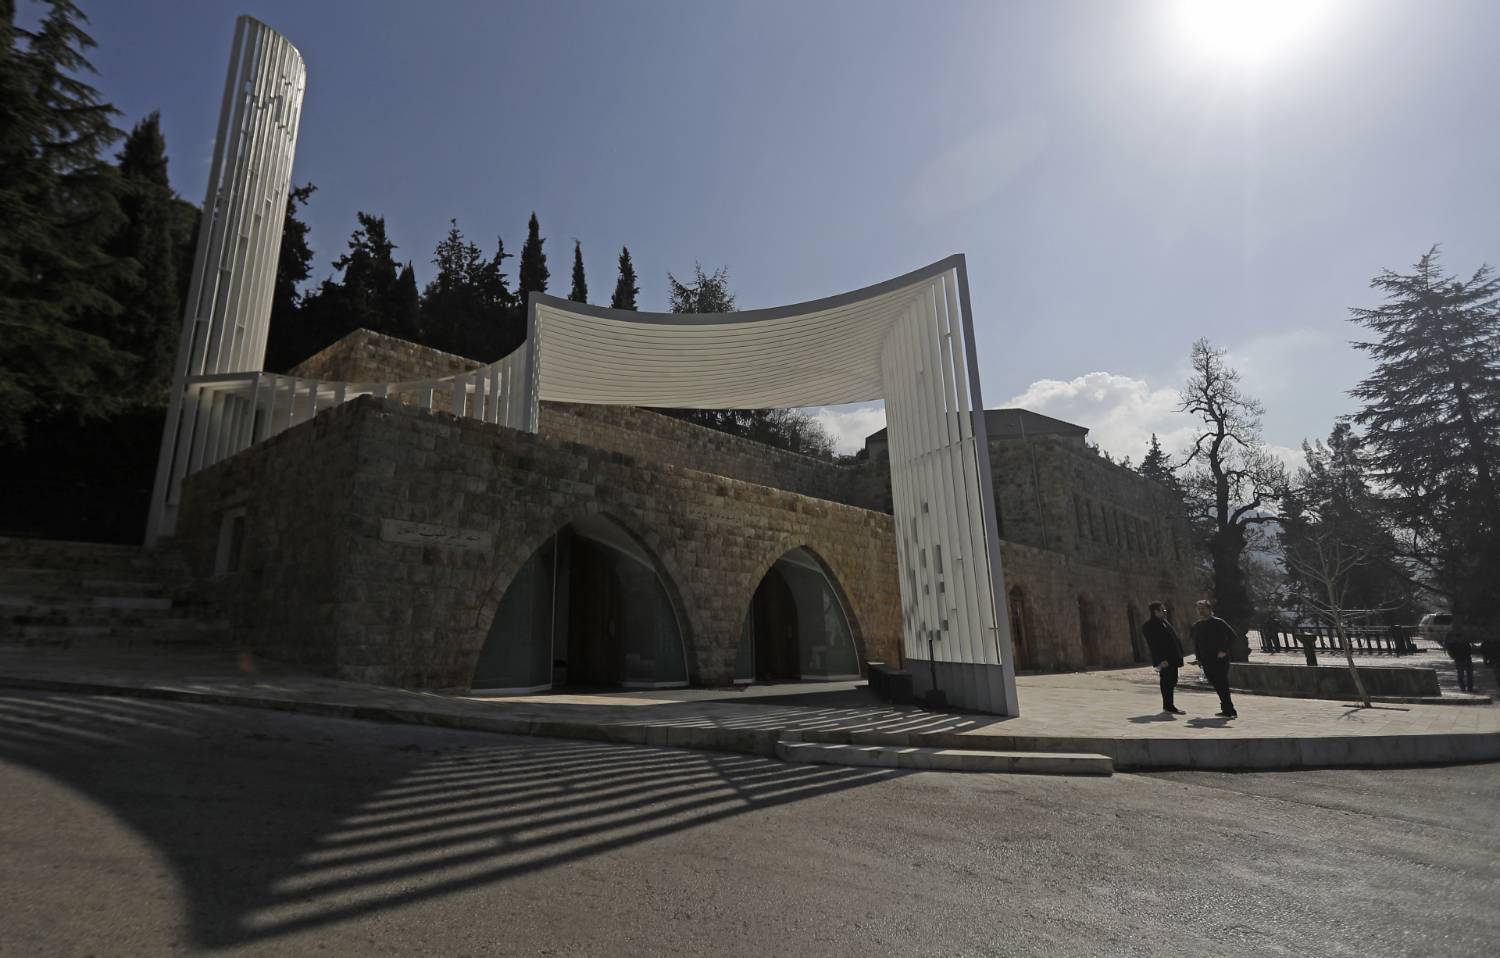 The mosque has become a symbol for non-denominational worship in Lebanon after it was redesigned and renovated in 2016 (AFP)